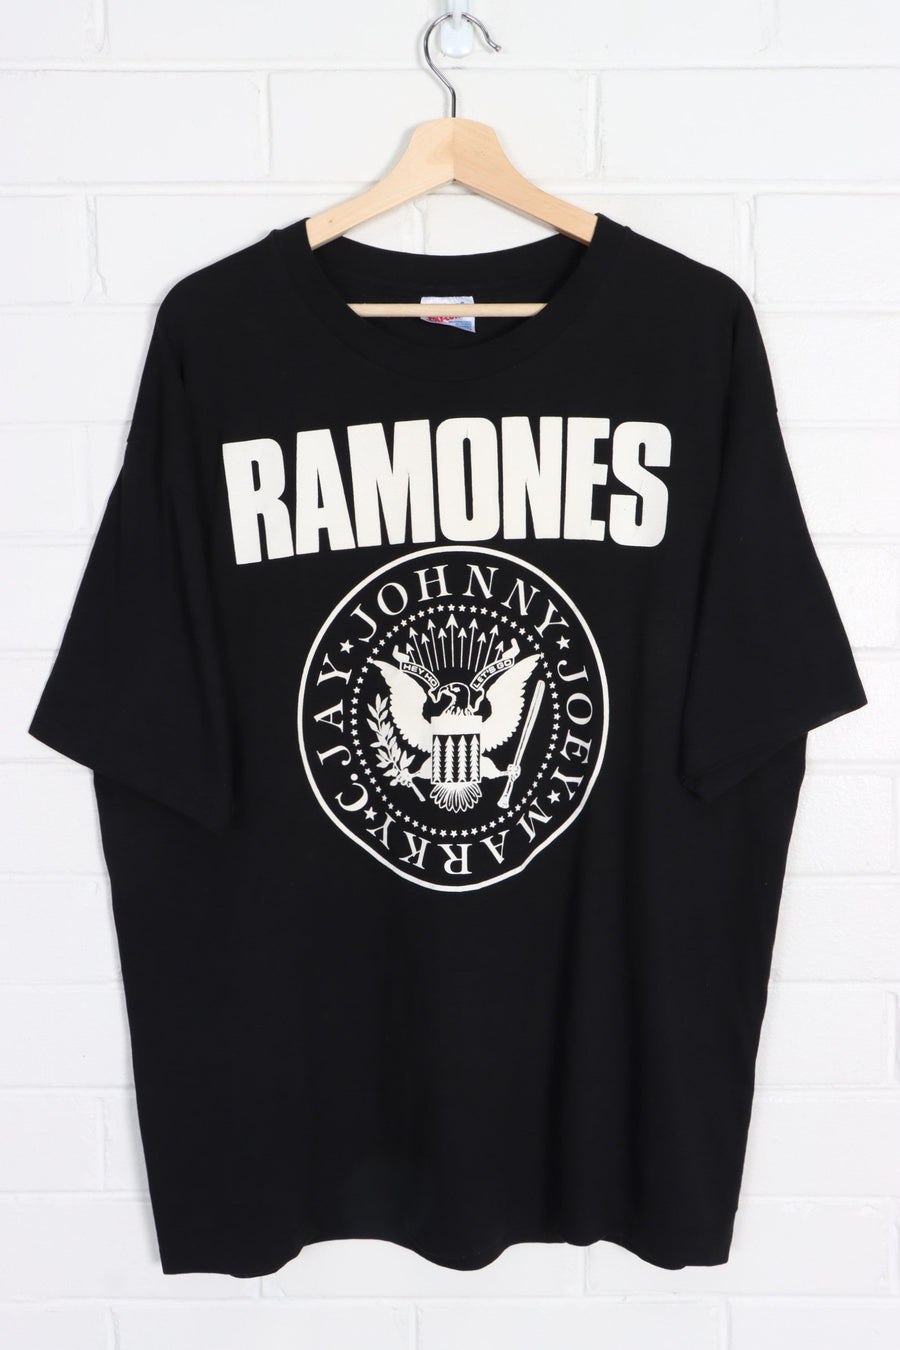 Ramones "Hey Ho Let's Go" Seal Front Back Single Stitch T-Shirt (L)